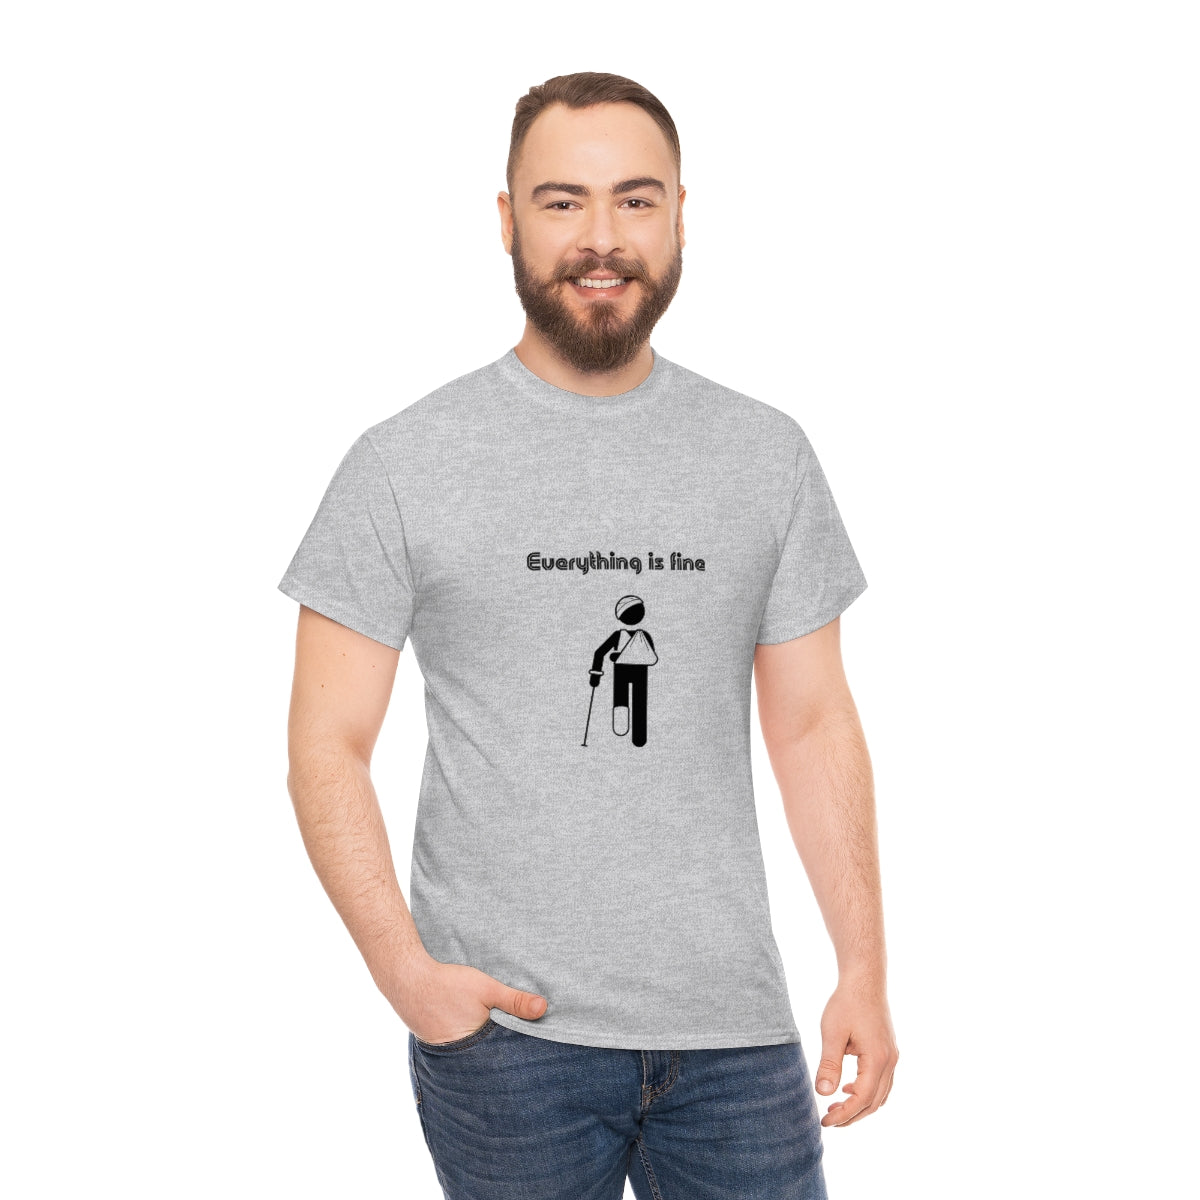 Everything is Fine Tshirt, I'm Fine Everything is Fine, Sarcastic Tshirt, Funny Tshirt, Recovering From Surgery Tshirt, Physical Therapy Tee - The Good Life Vibe